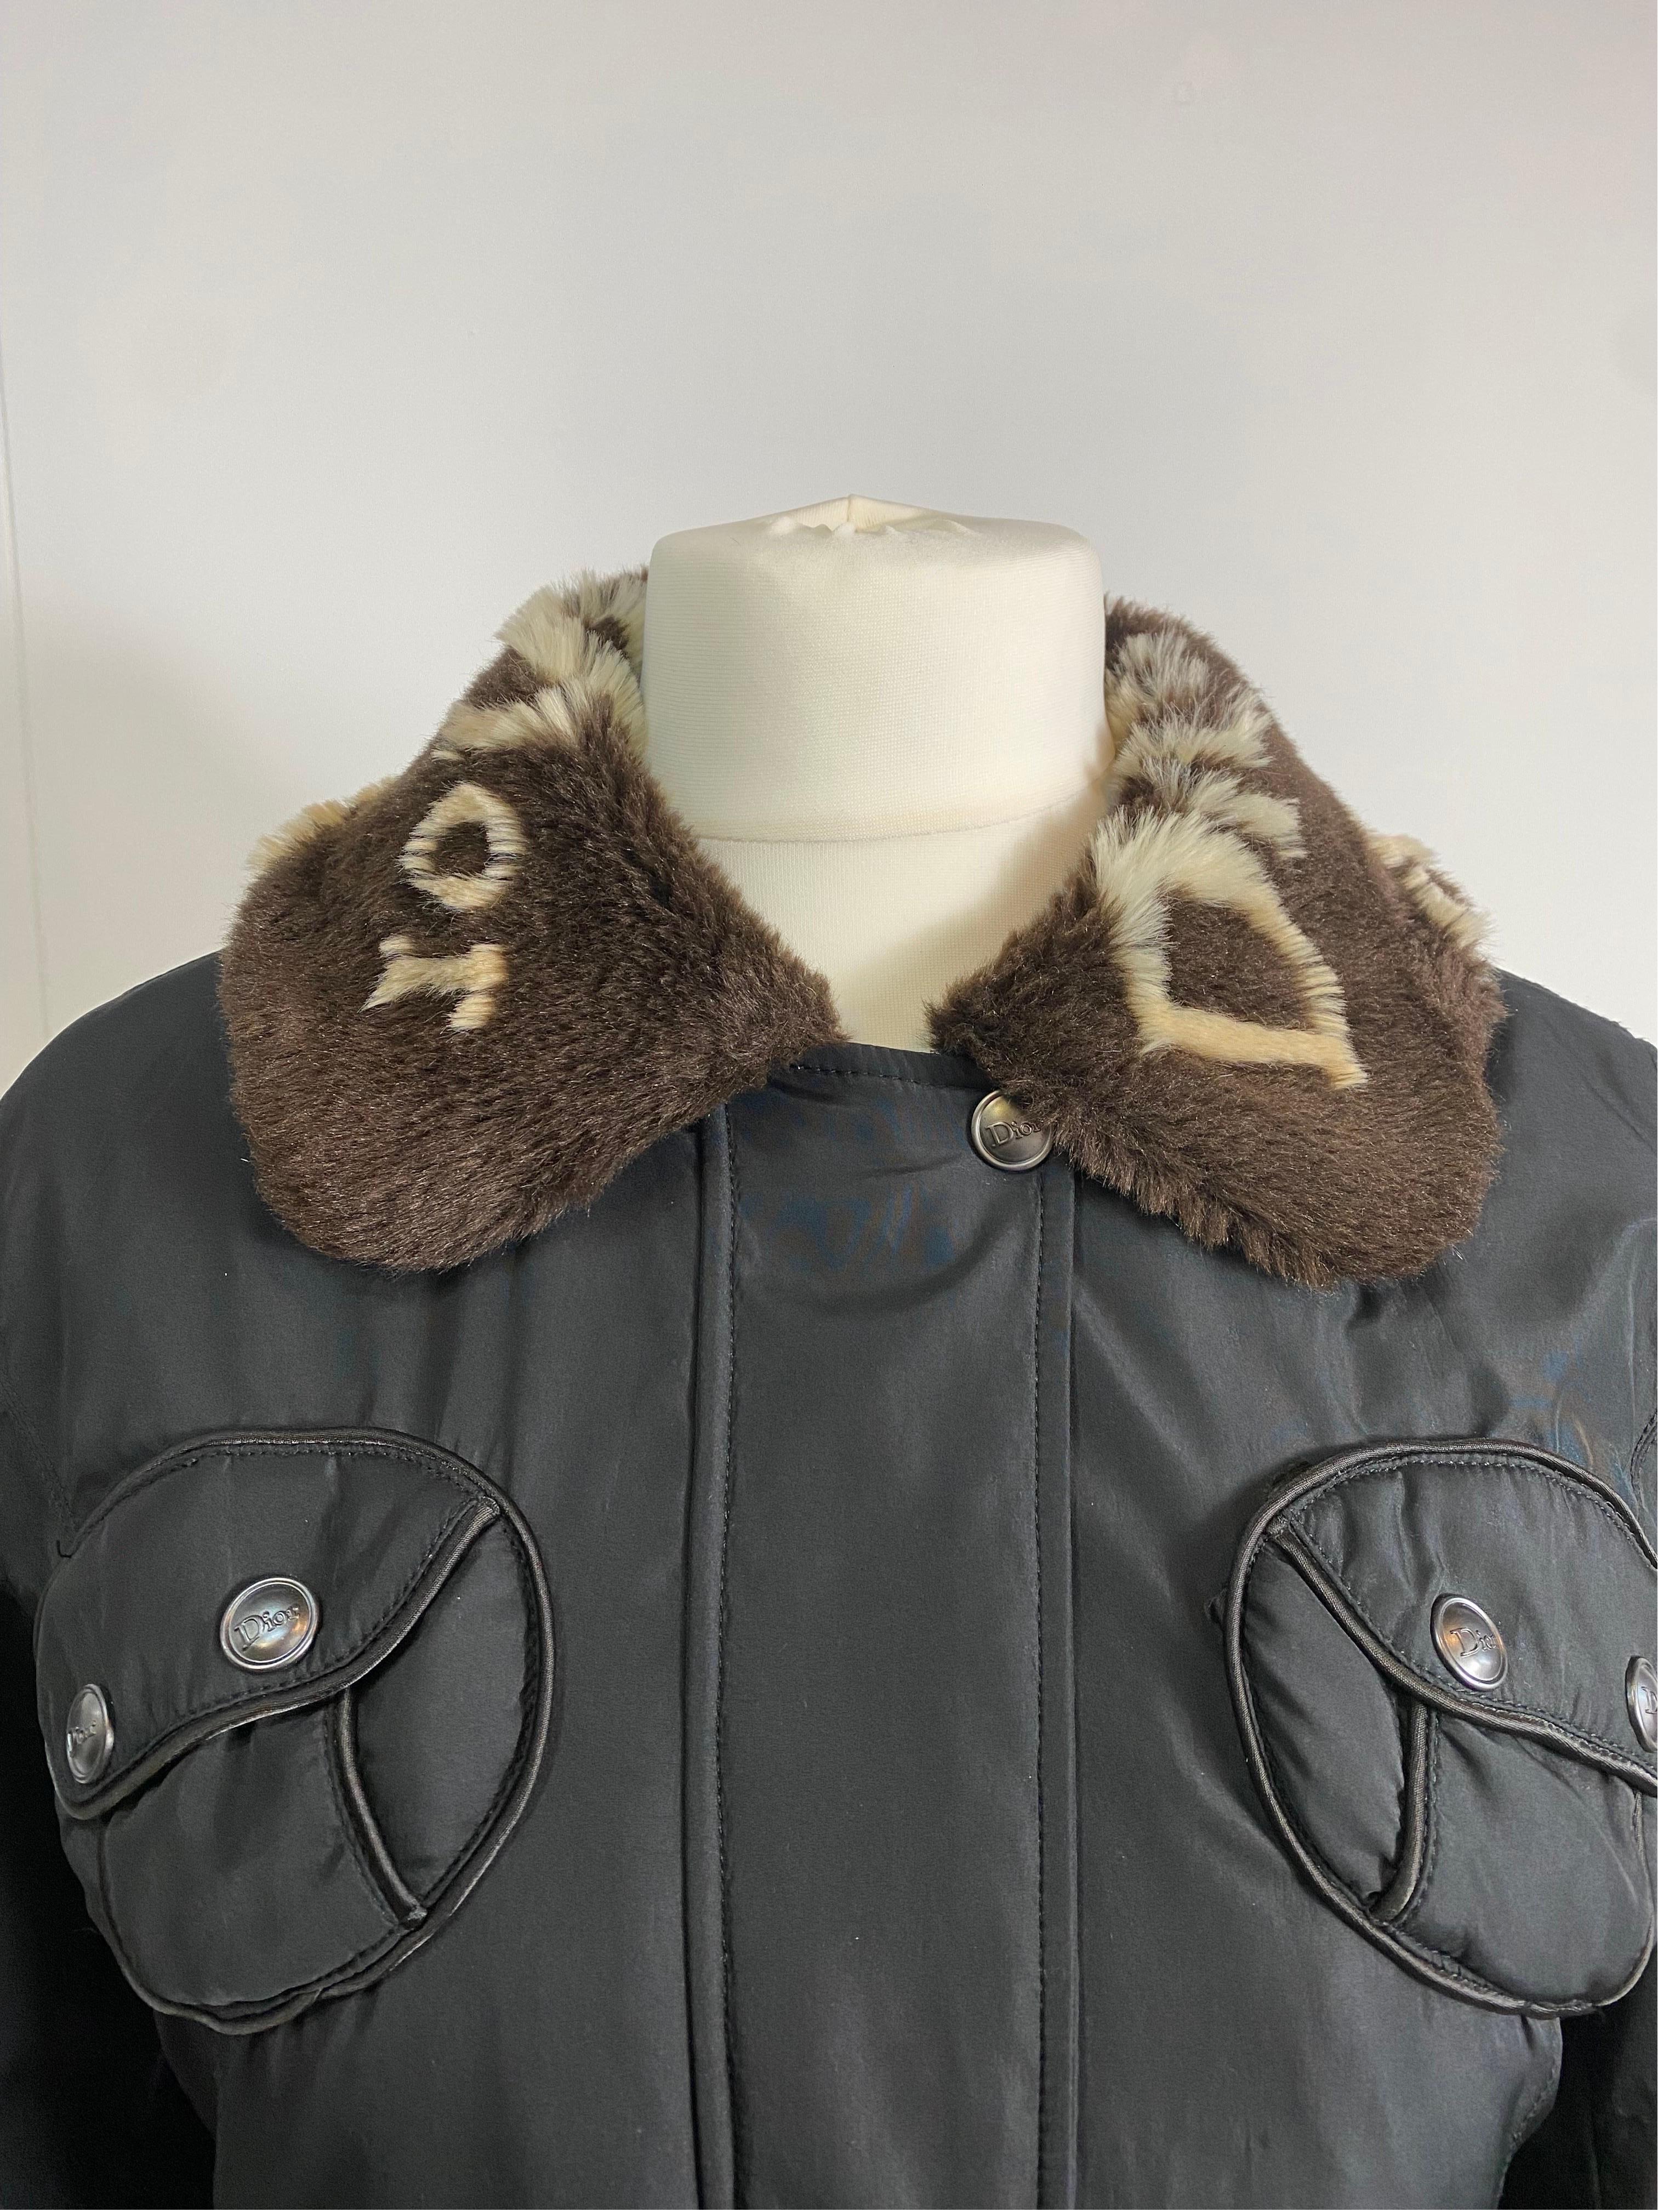 Christian Dior winter jacket.
100% cotton with faux fur heart details.
French size 38 which corresponds to an Italian 42.
Shoulders 42 cm
Bust 48 cm
Length 68 cm
Sleeve 60 cm
Good general condition, shows signs of normal use.
Some light halo on the